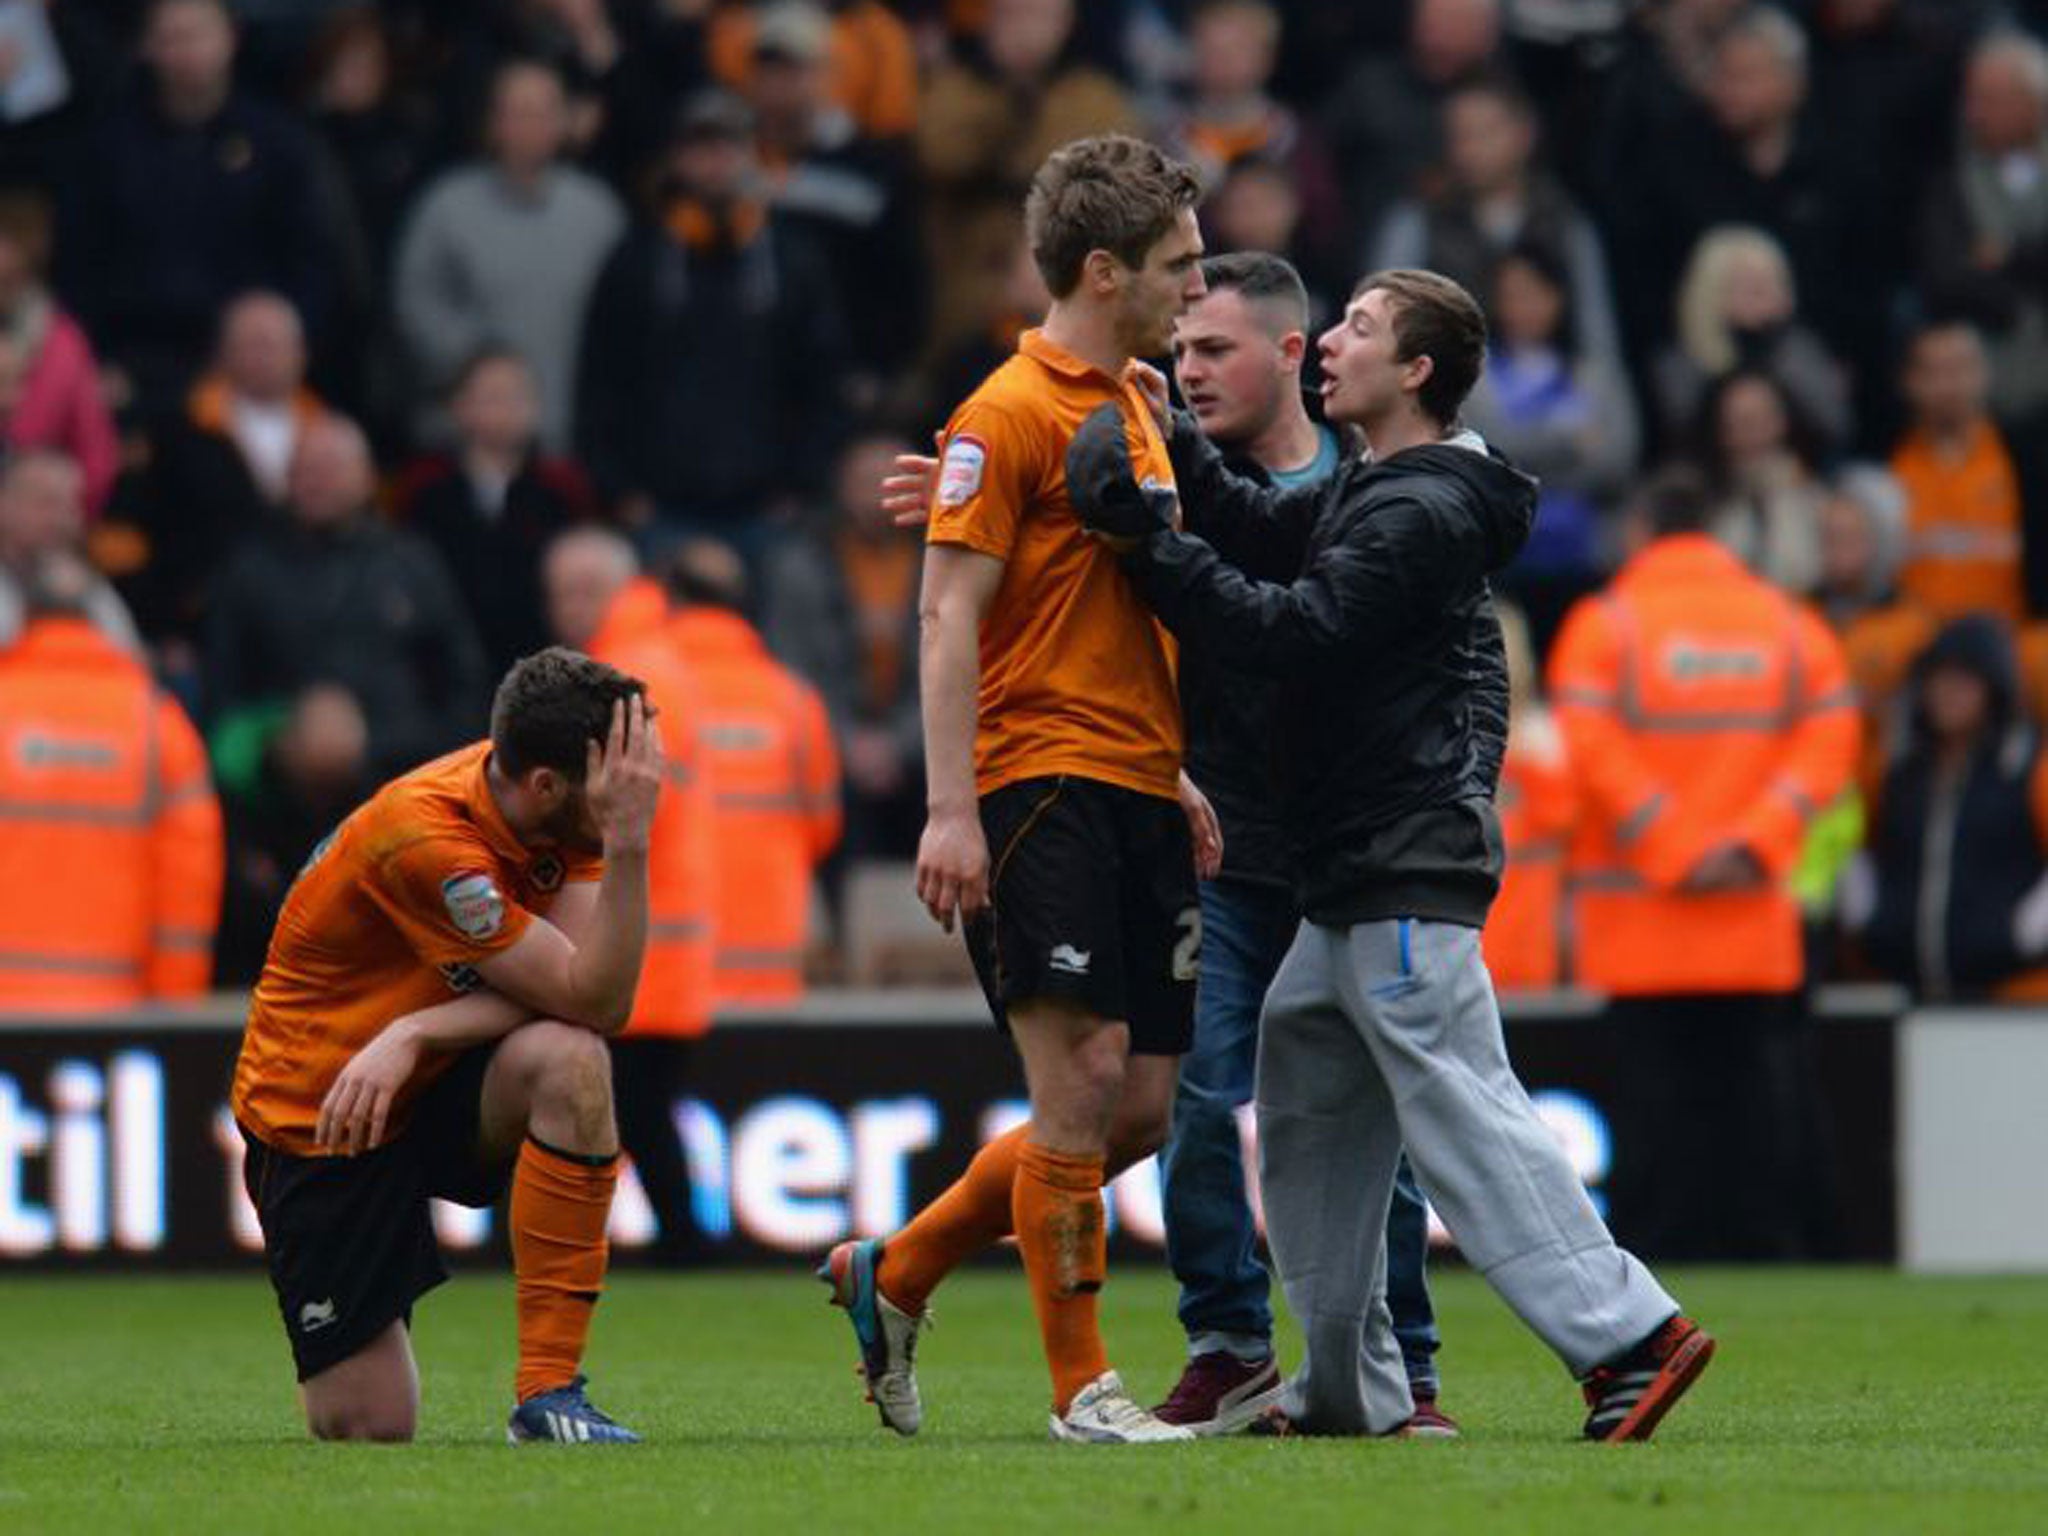 Kevin Doyle is surrounded by fans after the match on Saturday while his team-mate Roger Johnson holds his head in disbelief